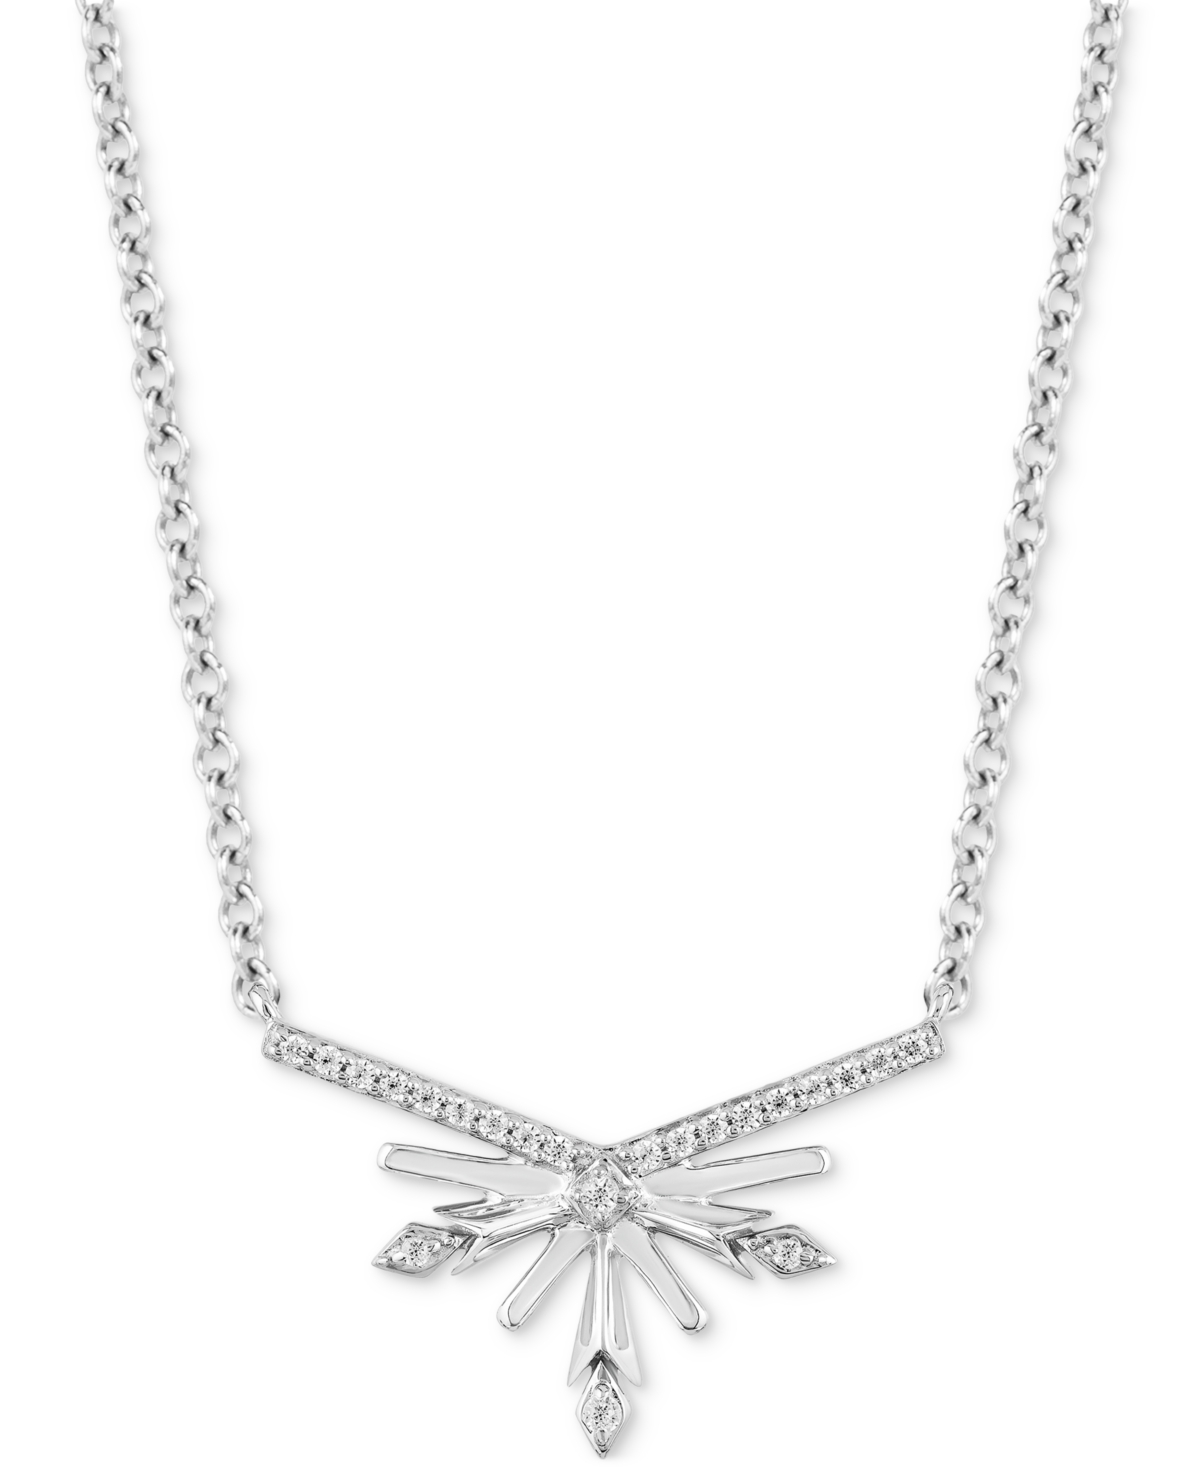 Diamond Elsa Snowflake Pendant Necklace (1/10 ct. t.w.) in Sterling Silver, 16" + 2" extender - Sterling Silver